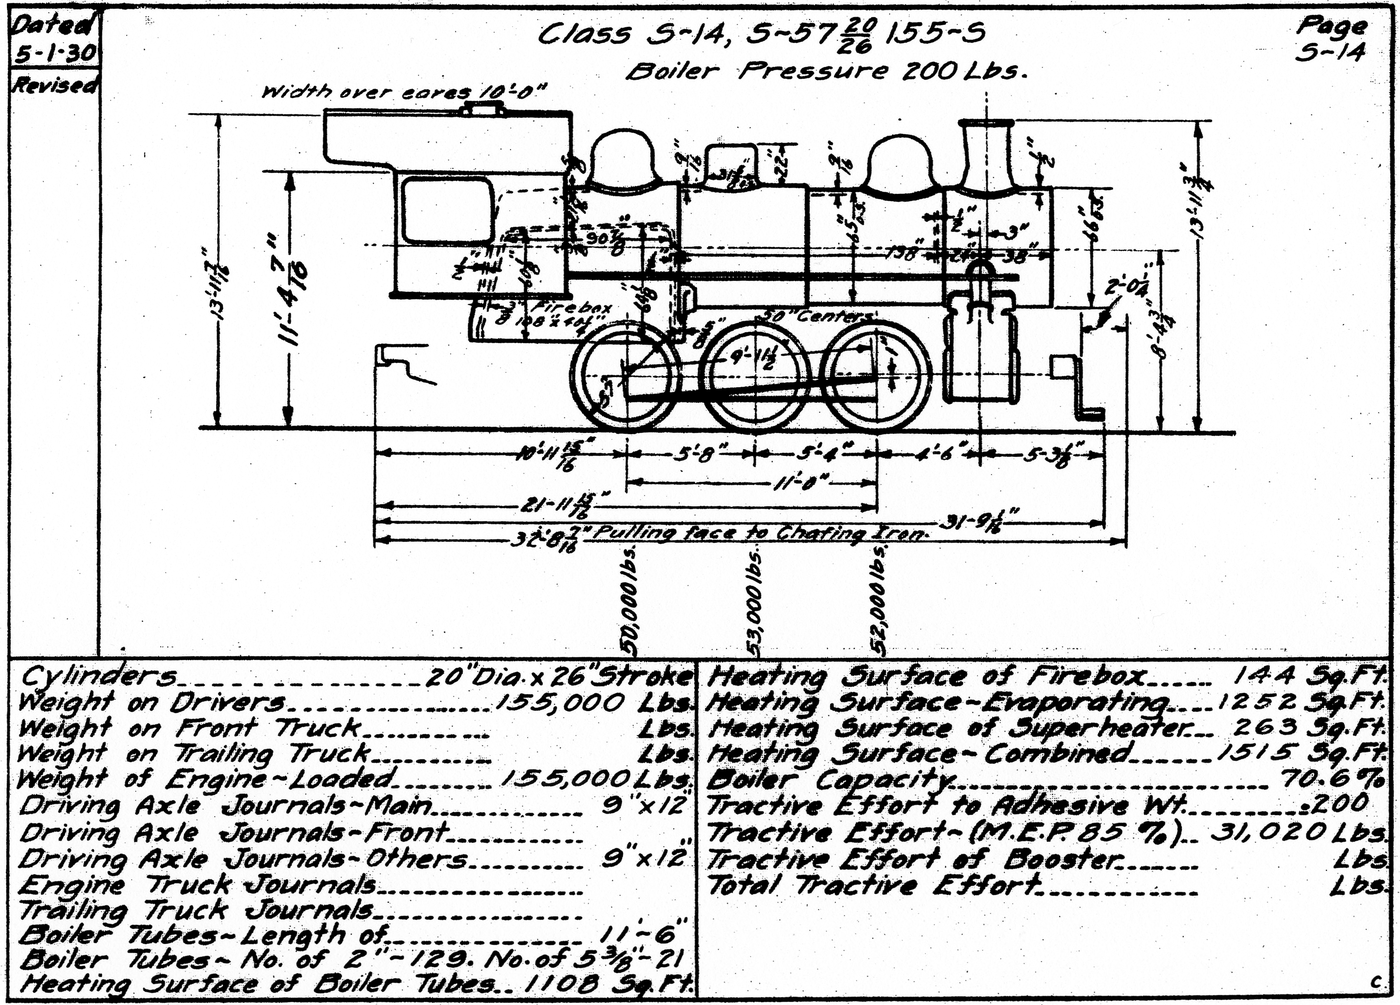 SP Class S-14 Schematic (Drawing)